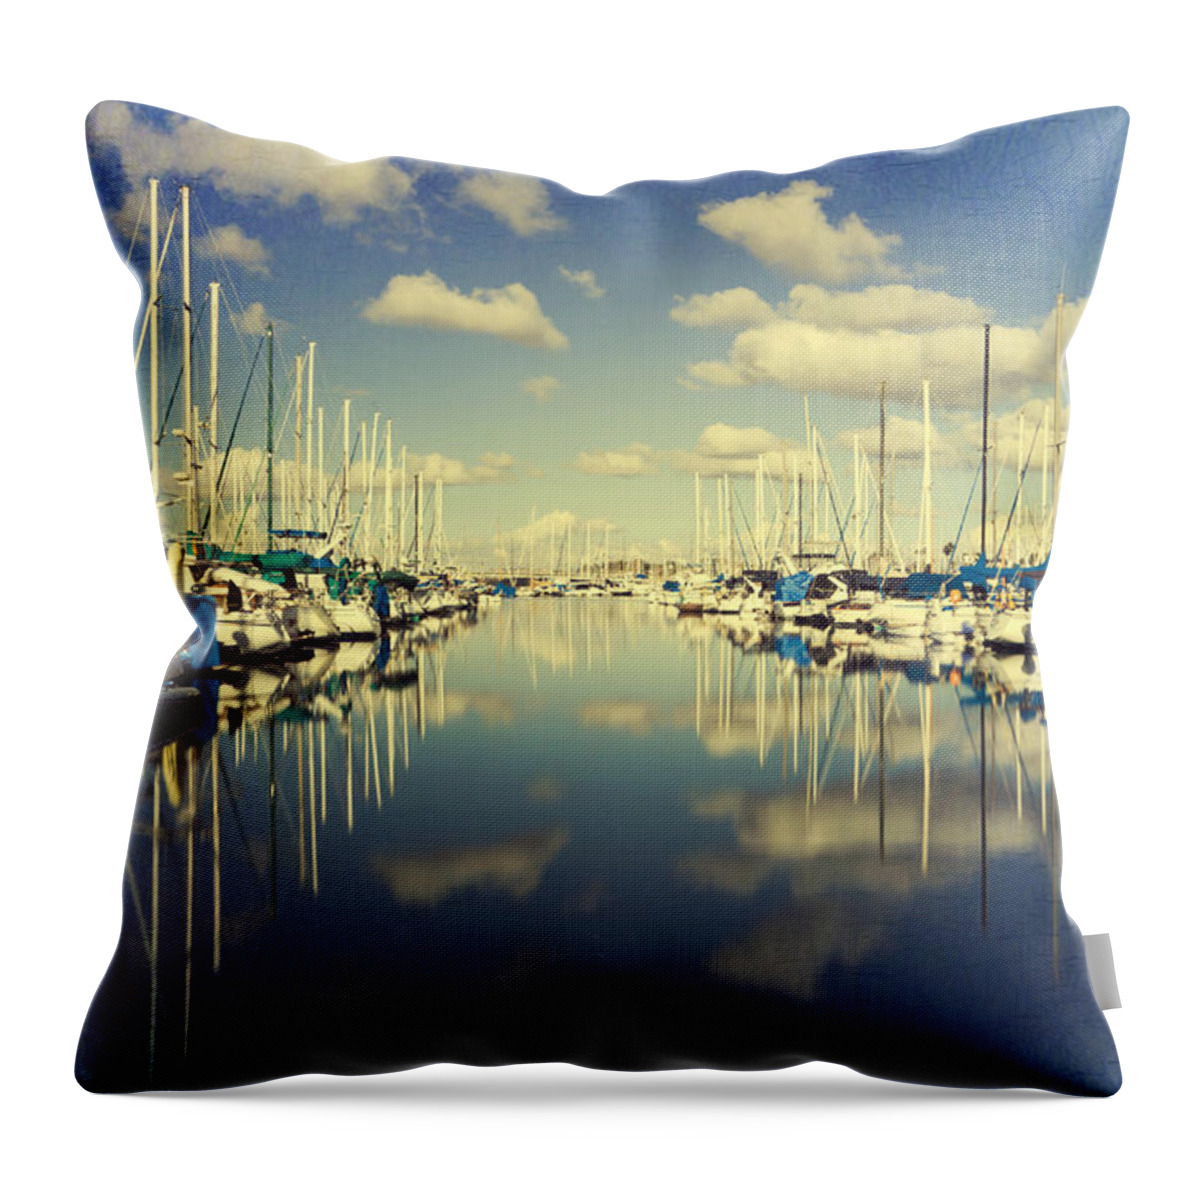 Amazing Throw Pillow featuring the photograph A Cloud Here A Cloud There by Heidi Smith